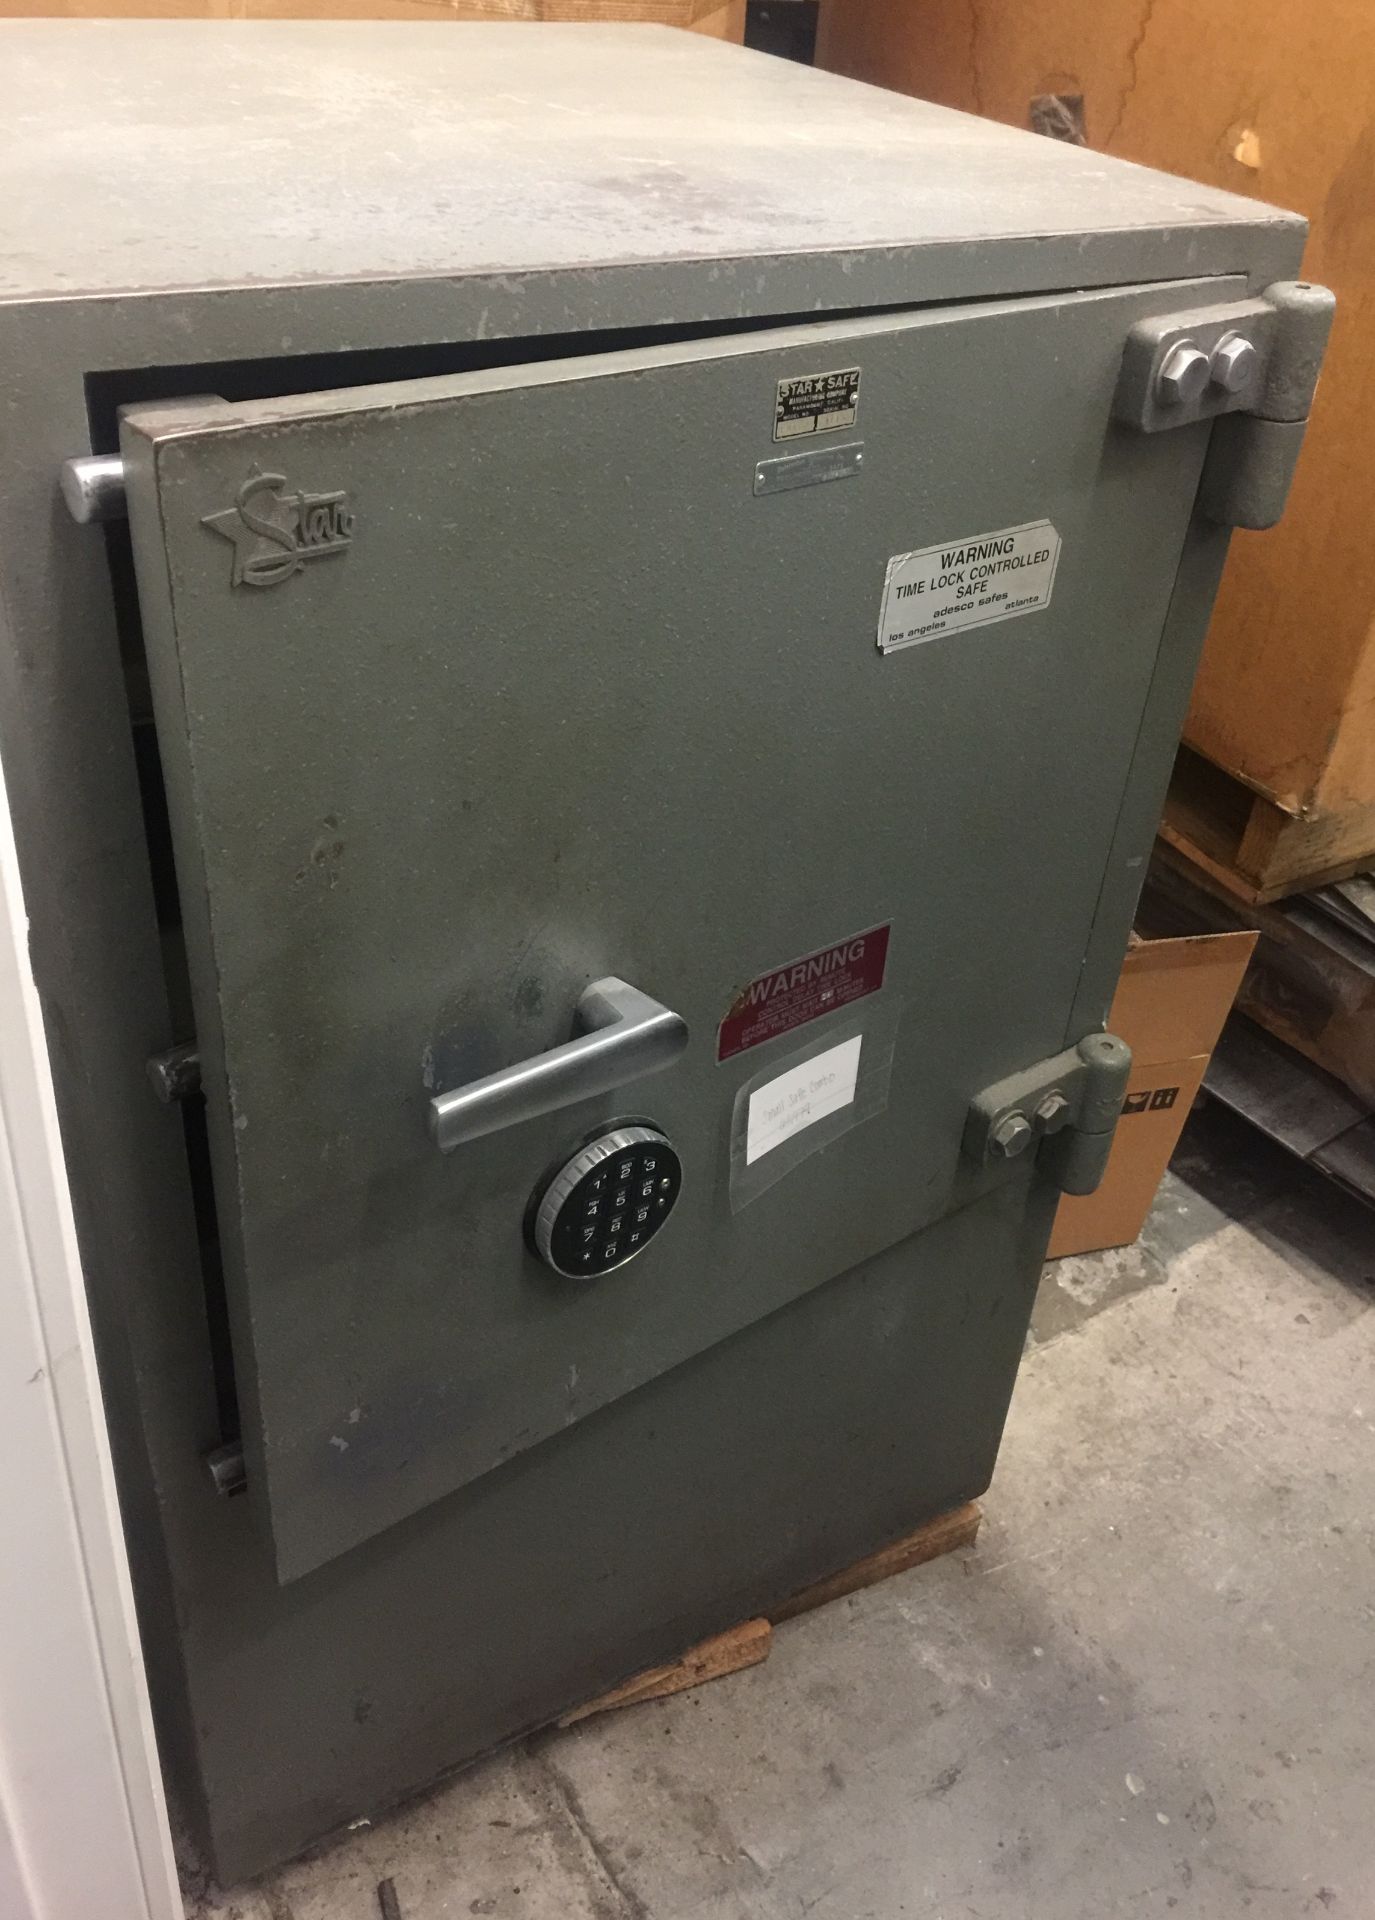 VERY LARGE STAR SAFE WITH COMBO / FIRE PROOF / 15 MIN OPEN TIMMER FROM BANK - Image 4 of 6